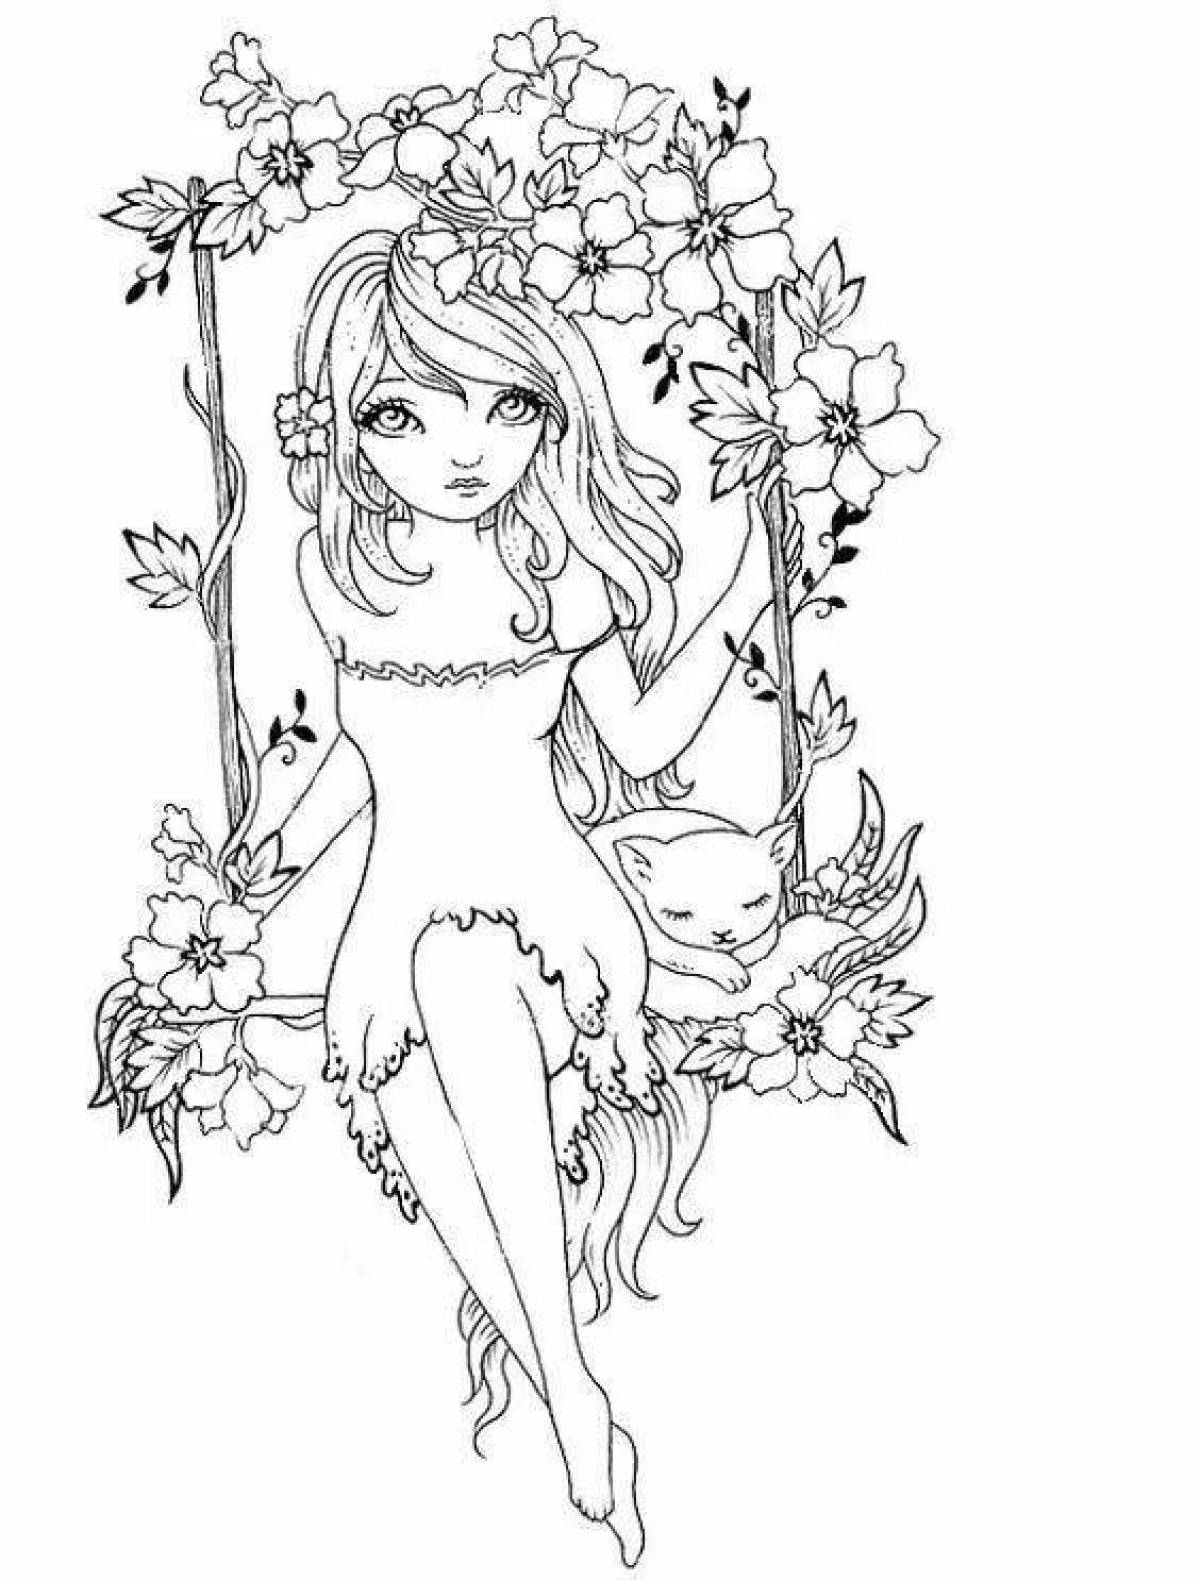 Playful spring girl coloring page